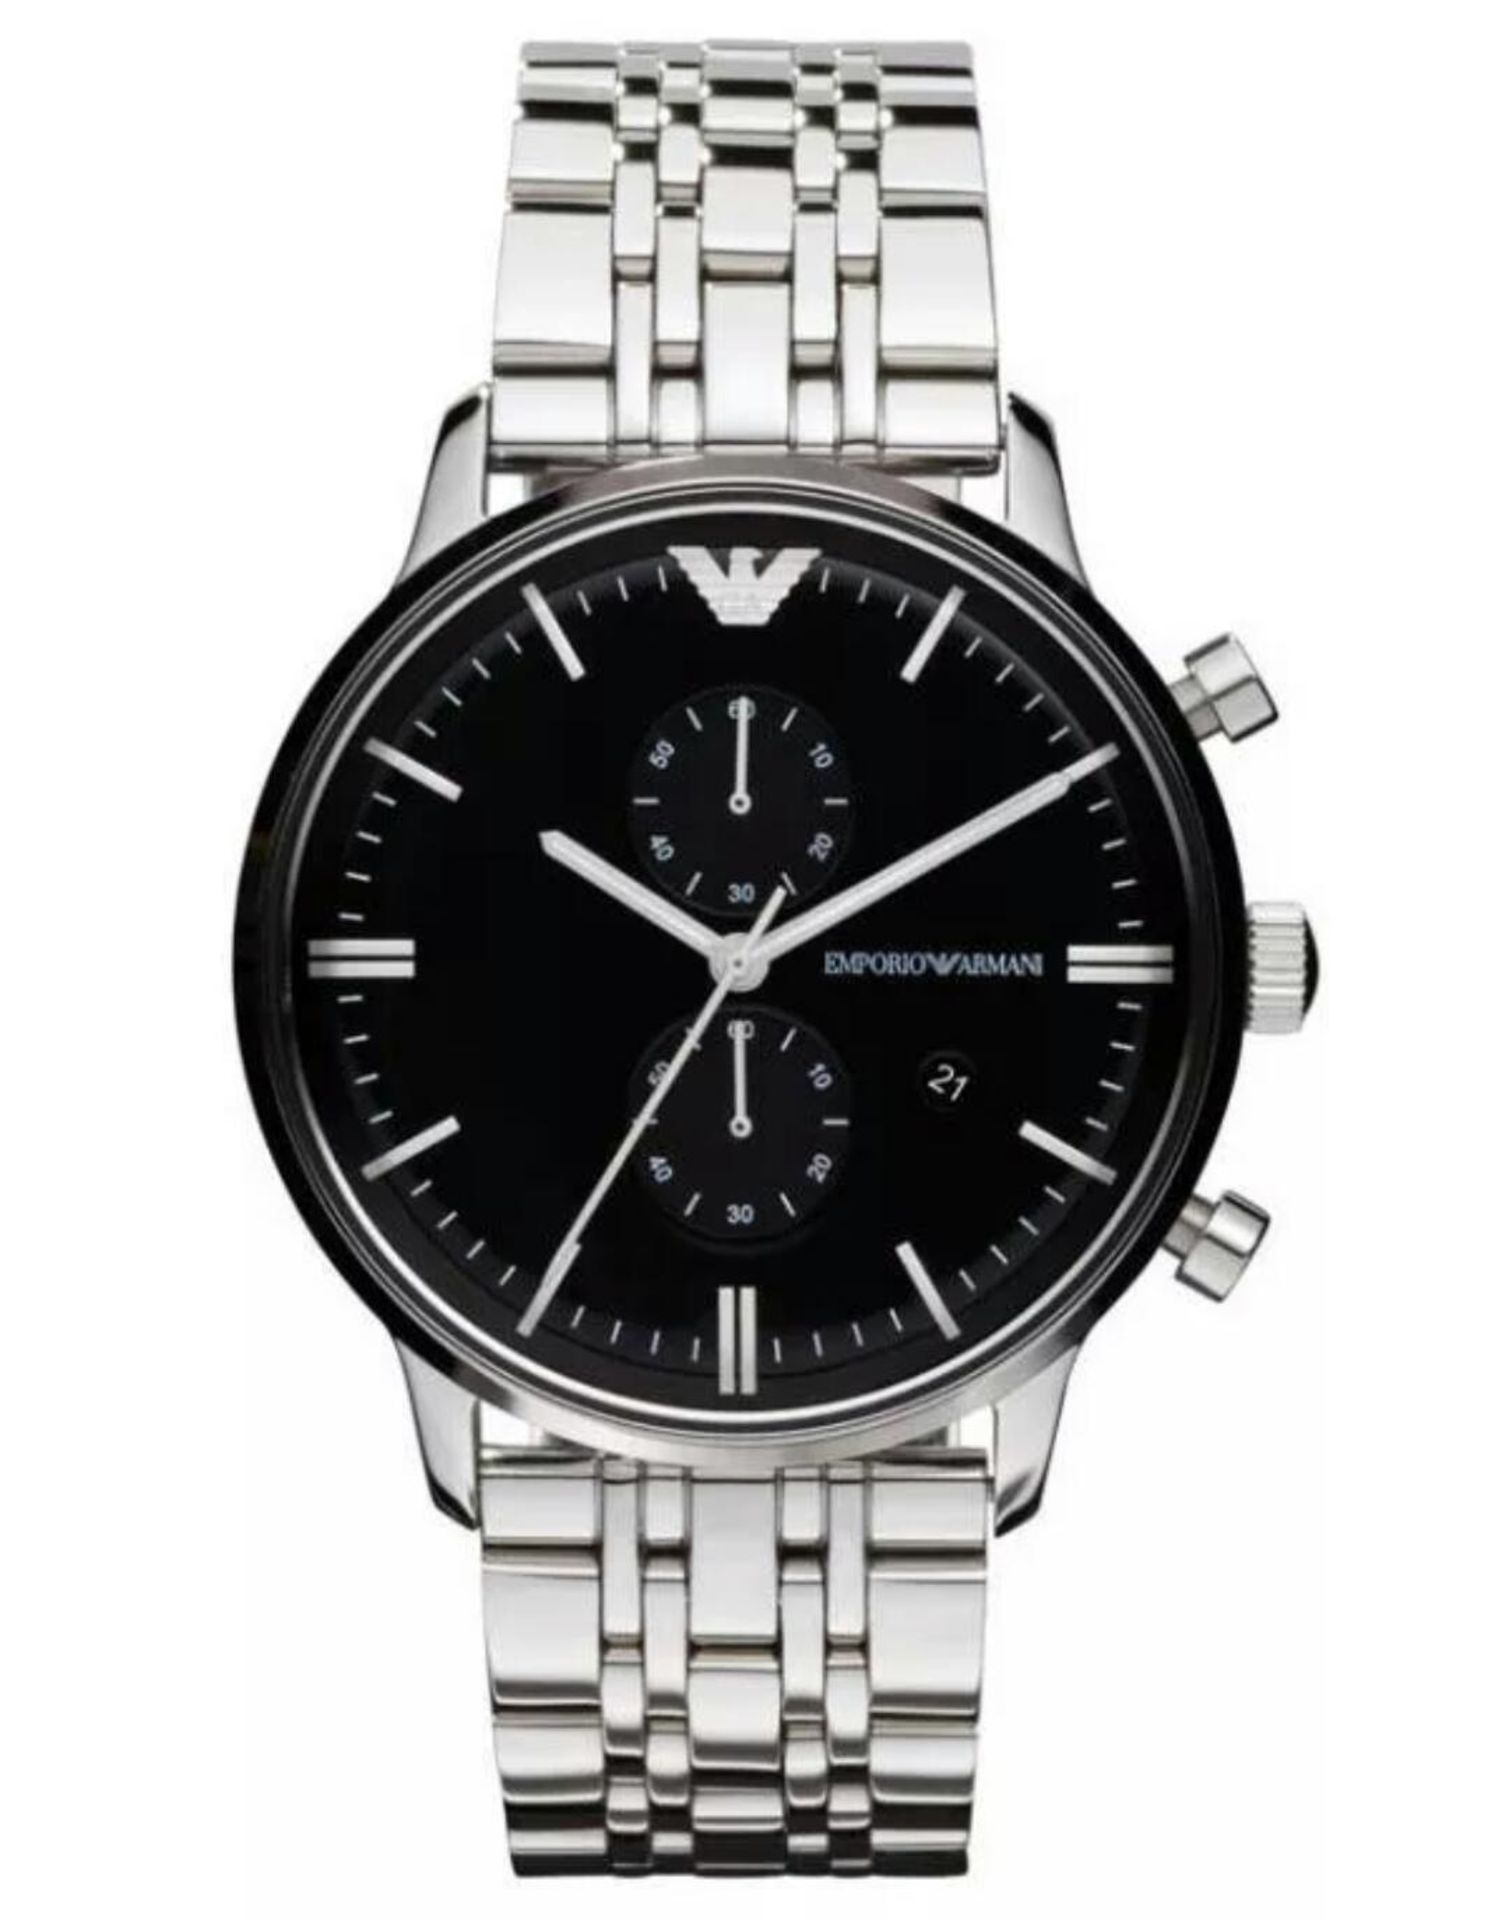 BRAND NEW EMPORIO ARMANI AR0389, GENTS POLISHED STAINLESS STEEL BRACELET WATCH, WITH A BLACK - Image 2 of 2